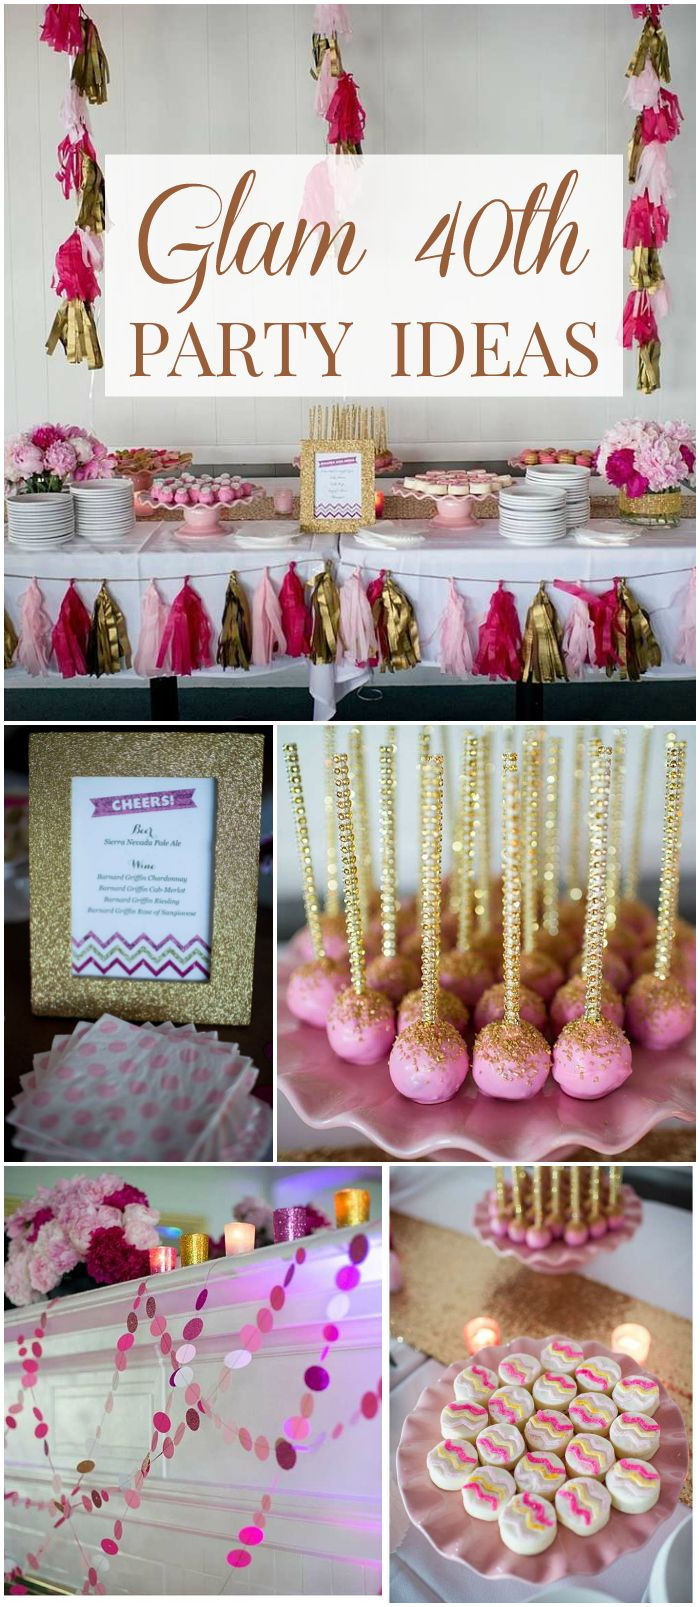 Decorations For 40th Birthday
 This pink and gold 40th birthday soiree is full of glitz